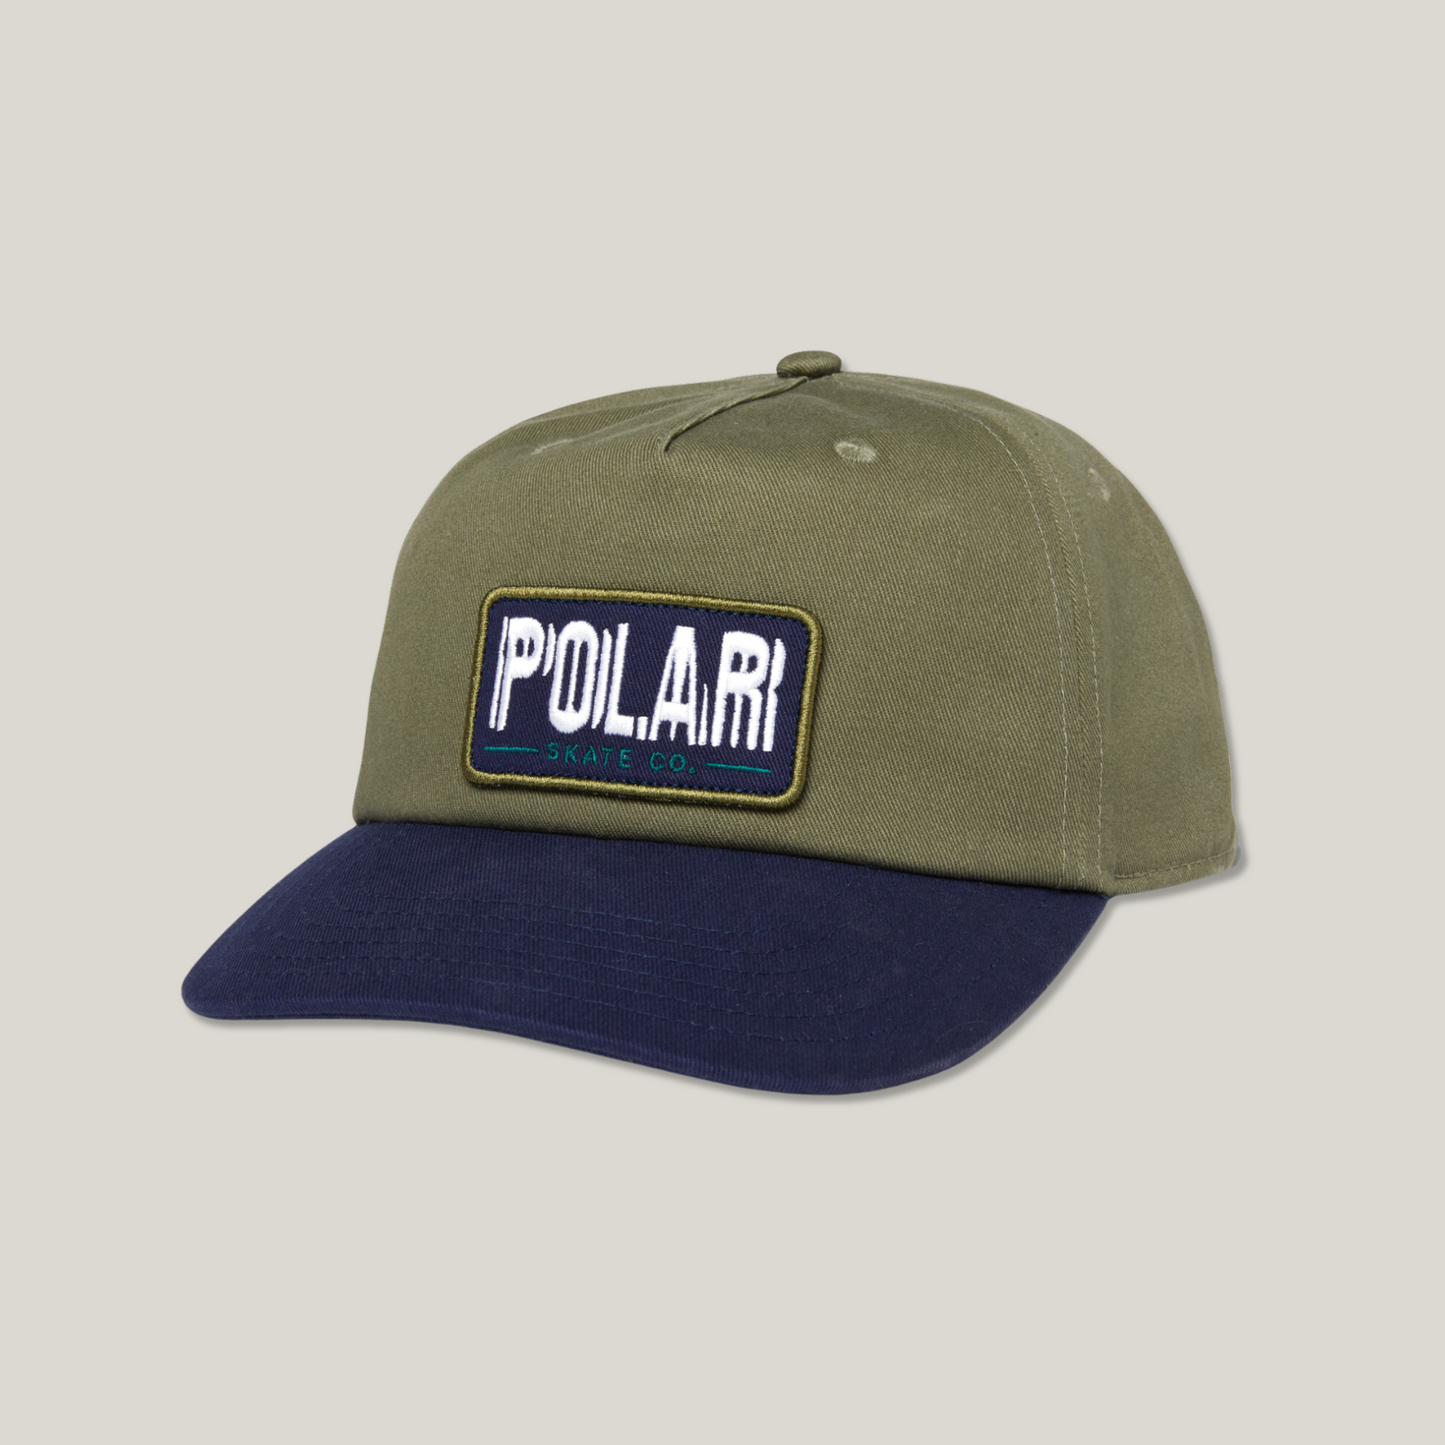 Load image into Gallery viewer, Polar - Earthquake patch cap - Green
